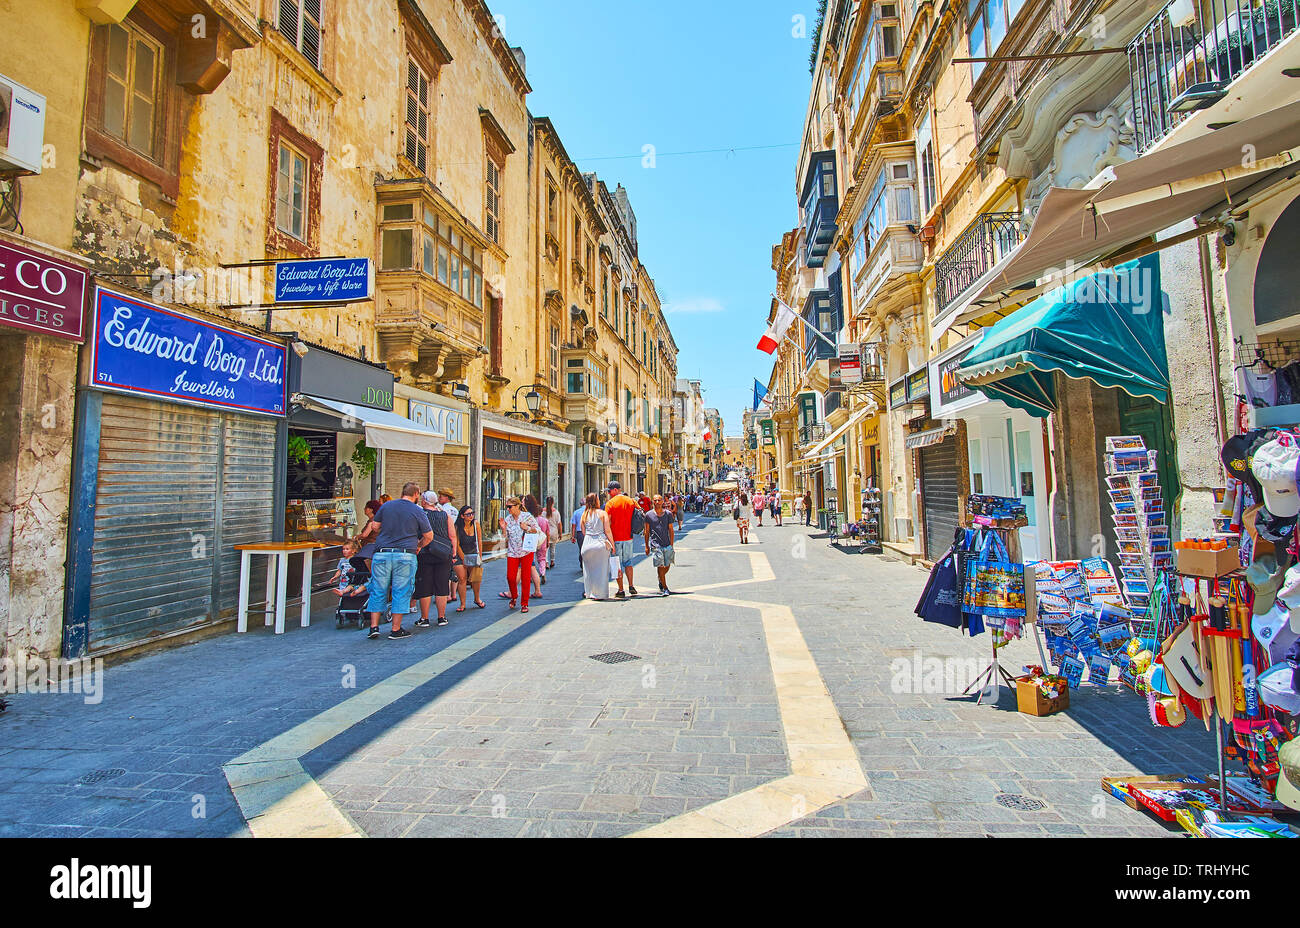 VALLETTA, MALTA - JUNE 19, 2018: One of the longest city streets - the Merchants street boasts many tourist shops, art galleries, cafes and souvenir s Stock Photo